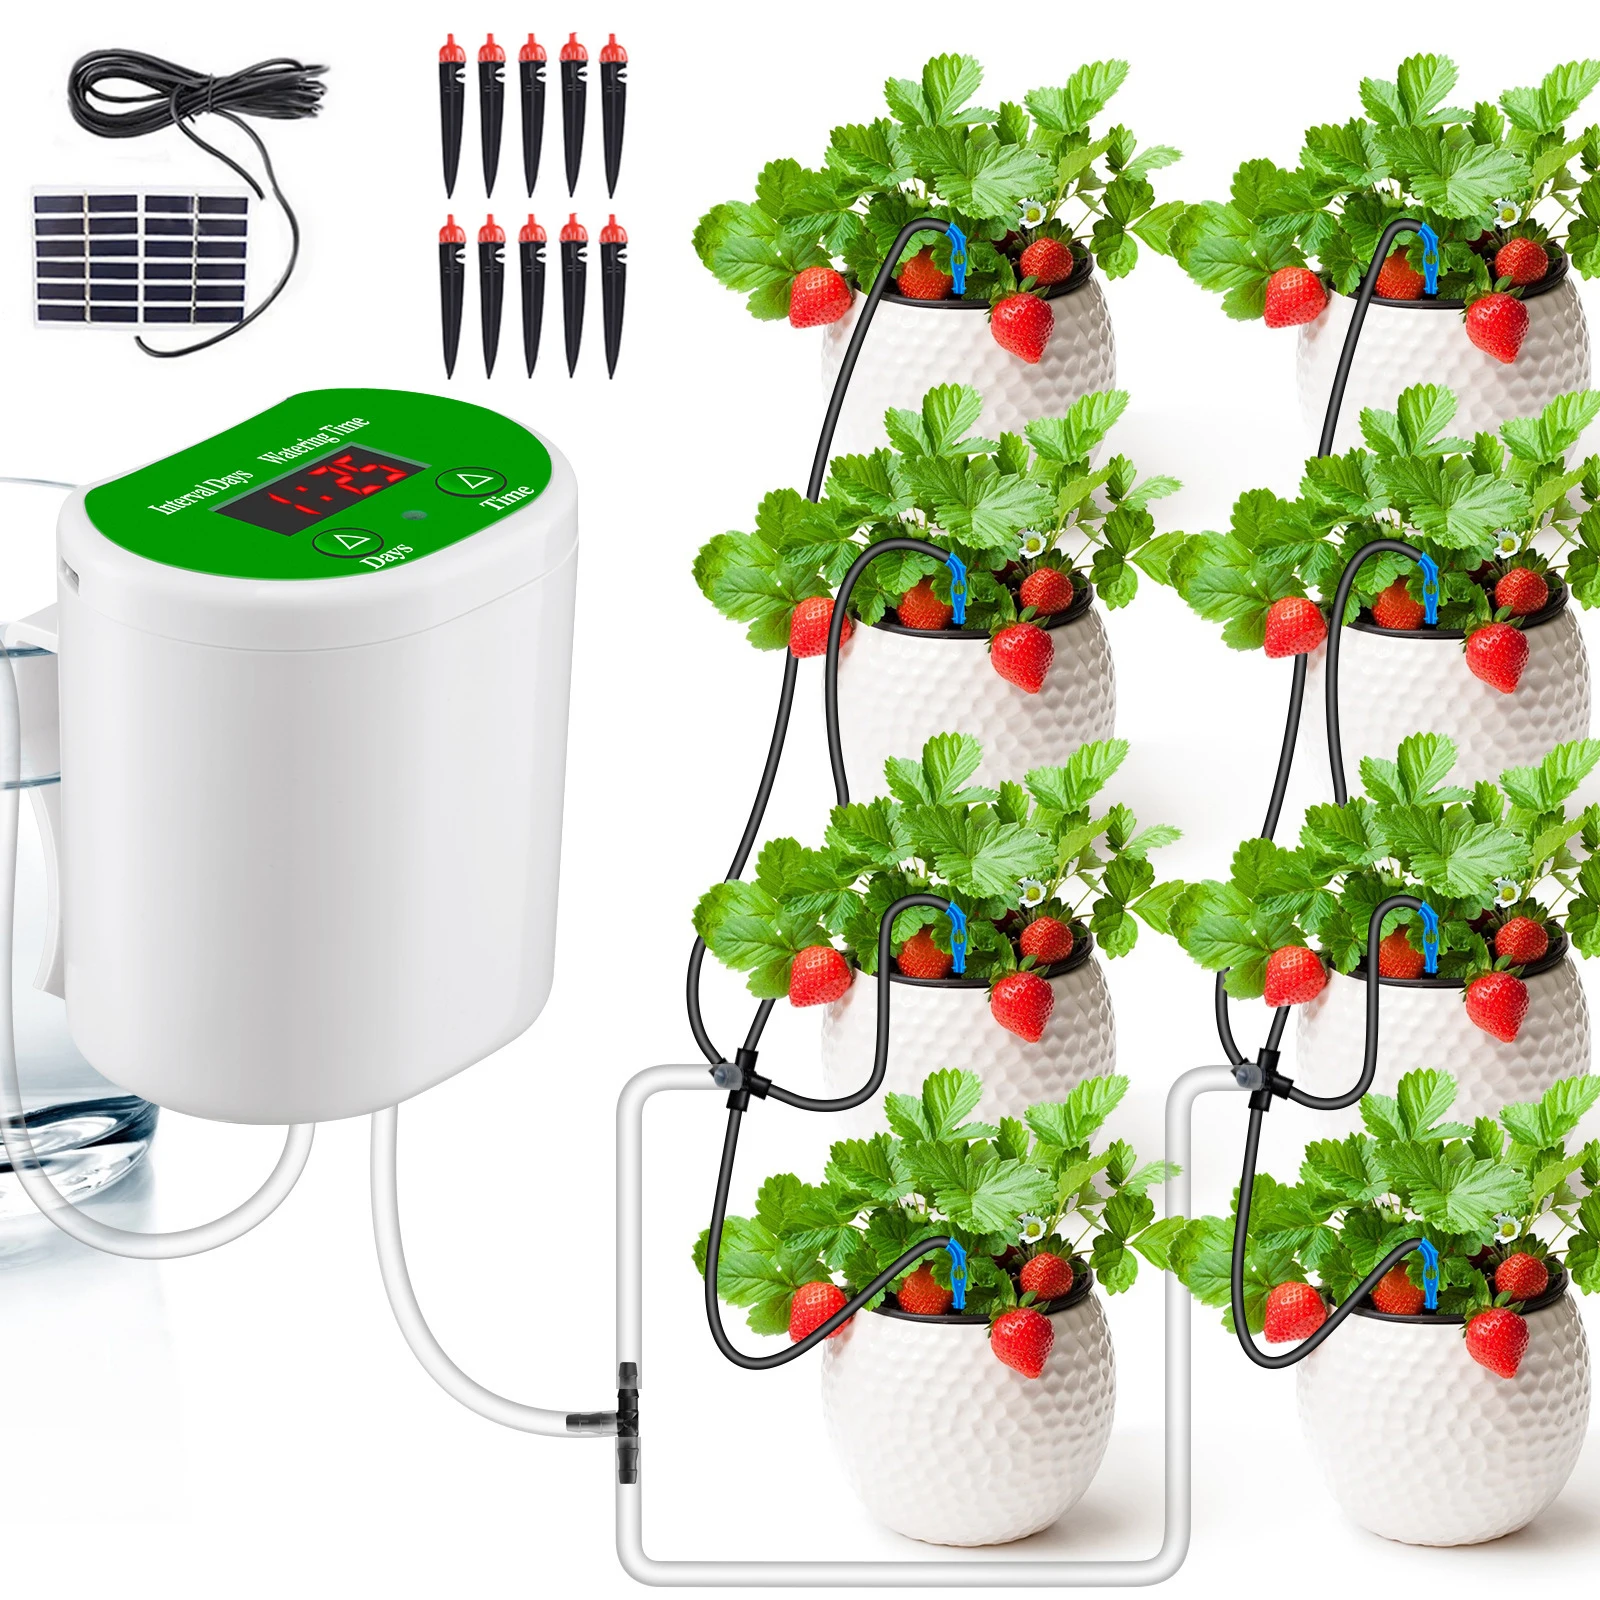 Intelligent Automatic Waterer Device Pump Timer Irrigation System Garden Watering With Solar Energy Charging Potted Plant